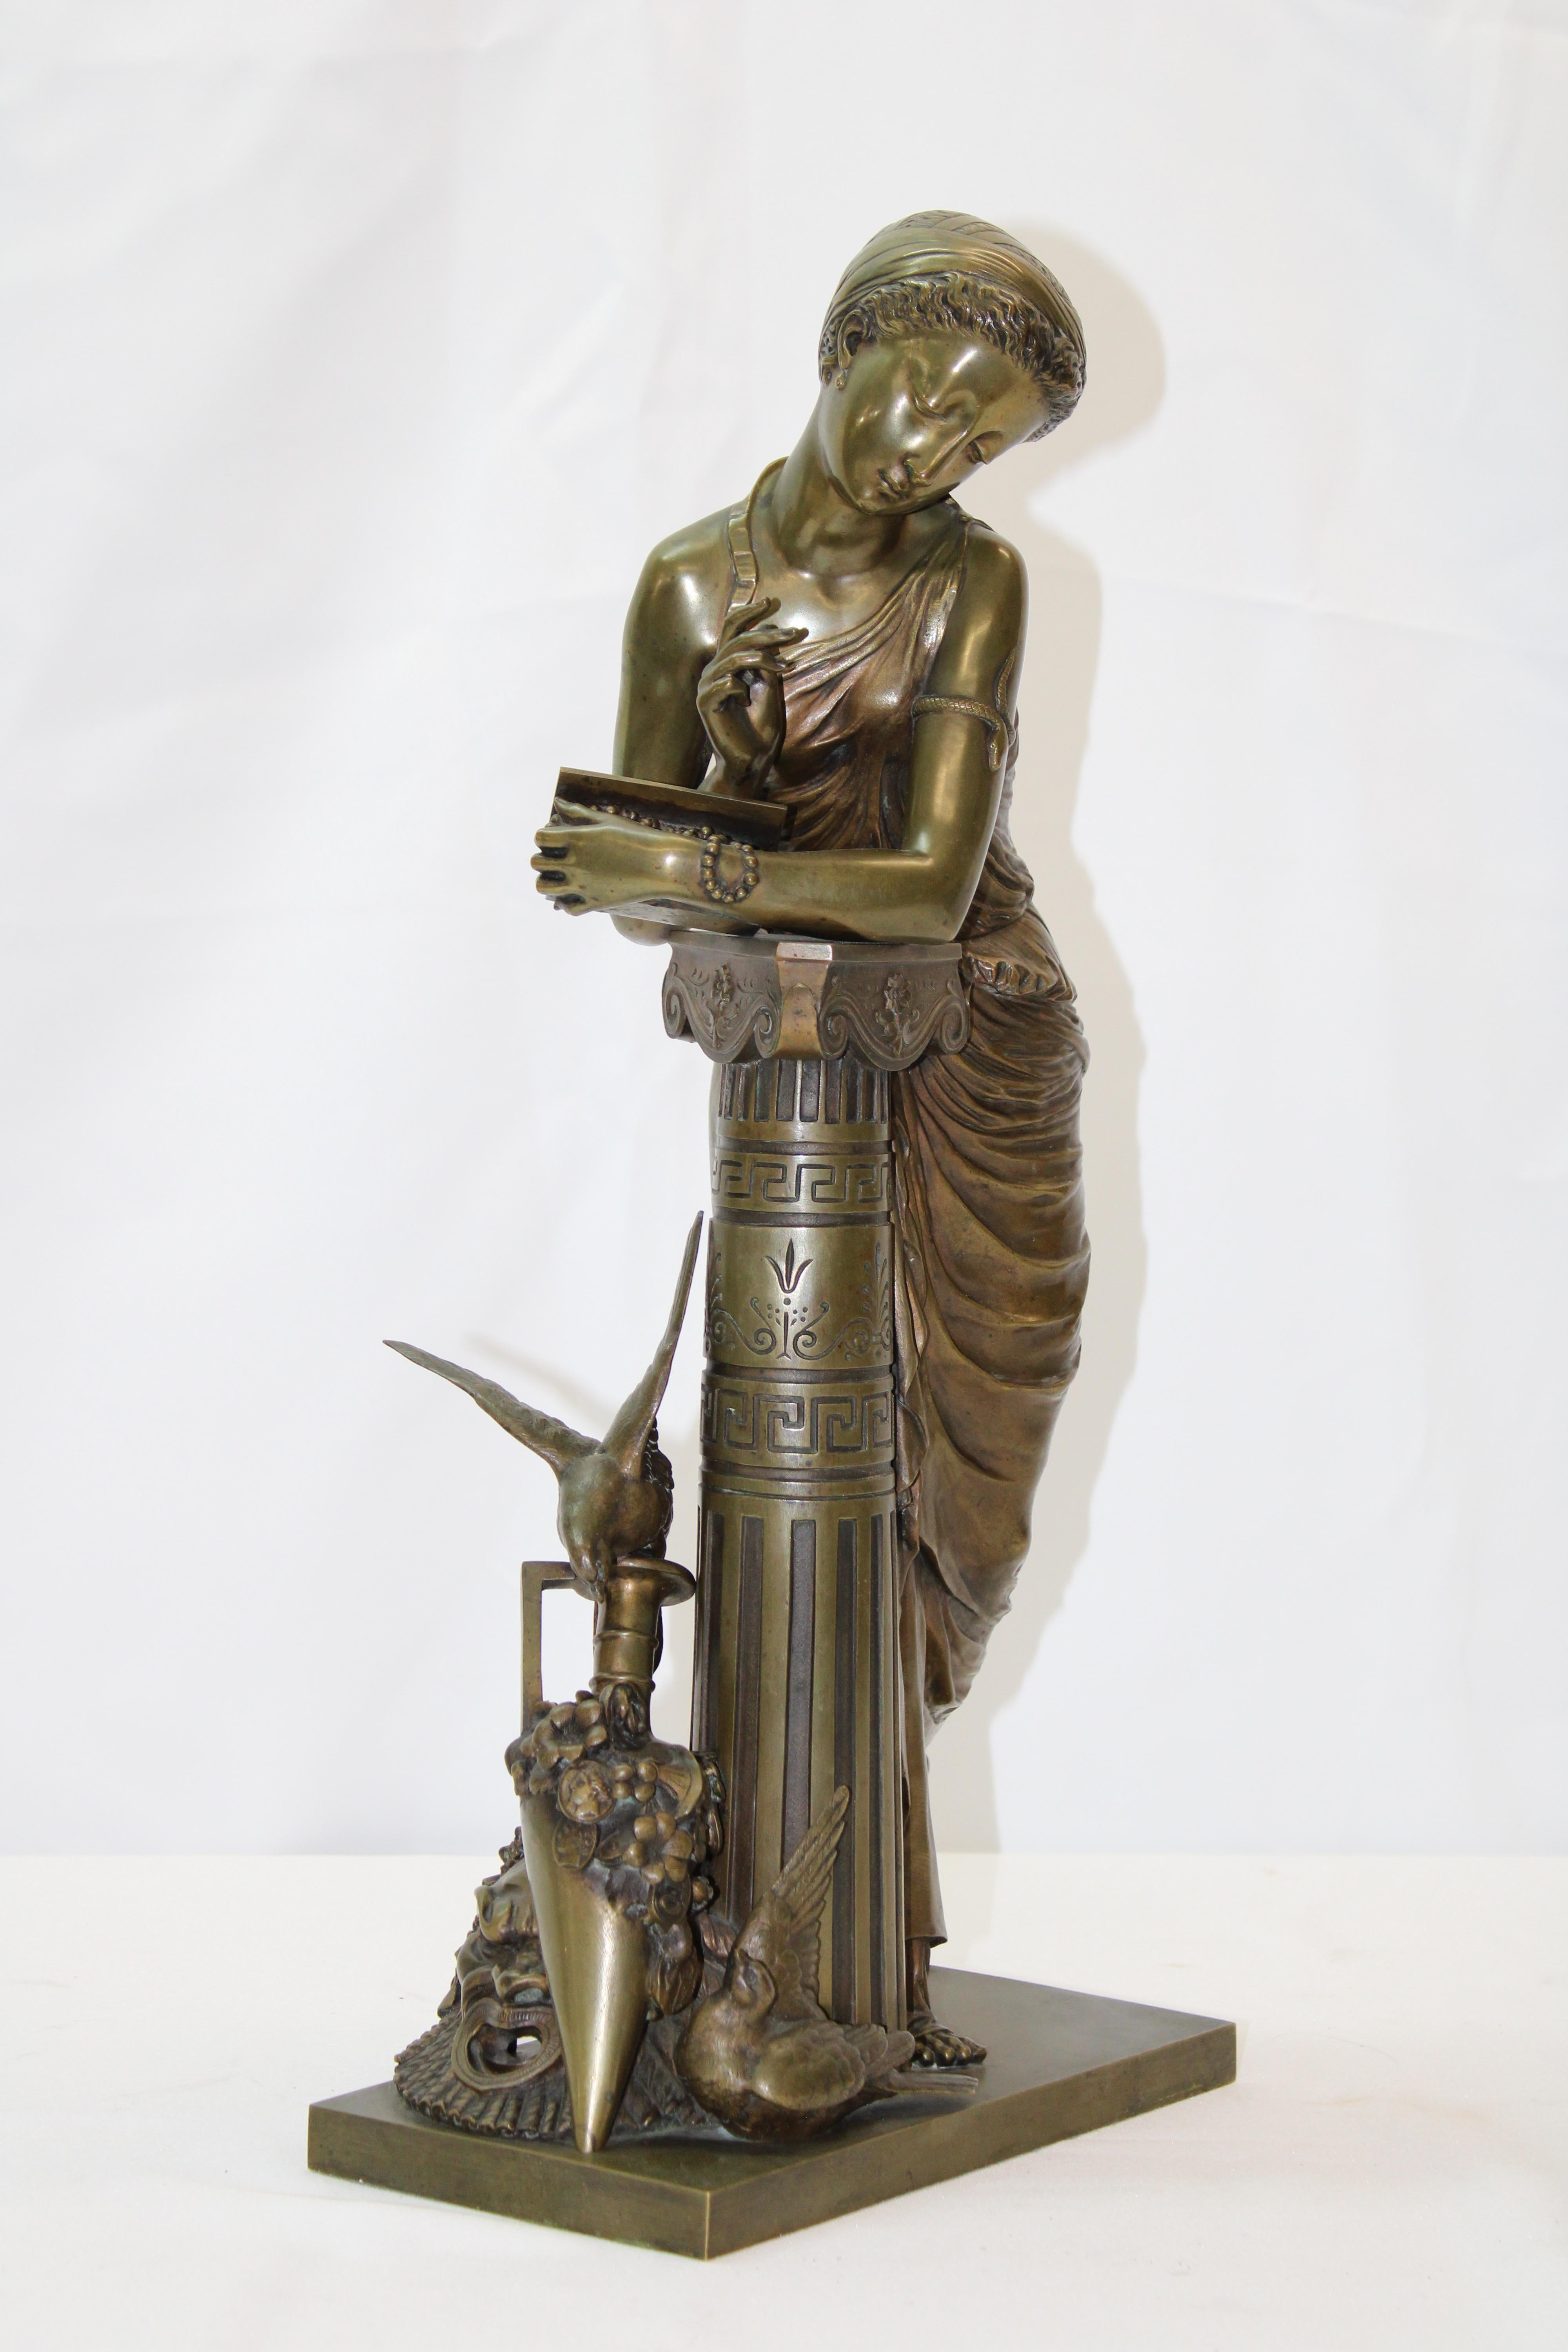 19th century French bronze woman leaning on column with embossed foundry stamp.